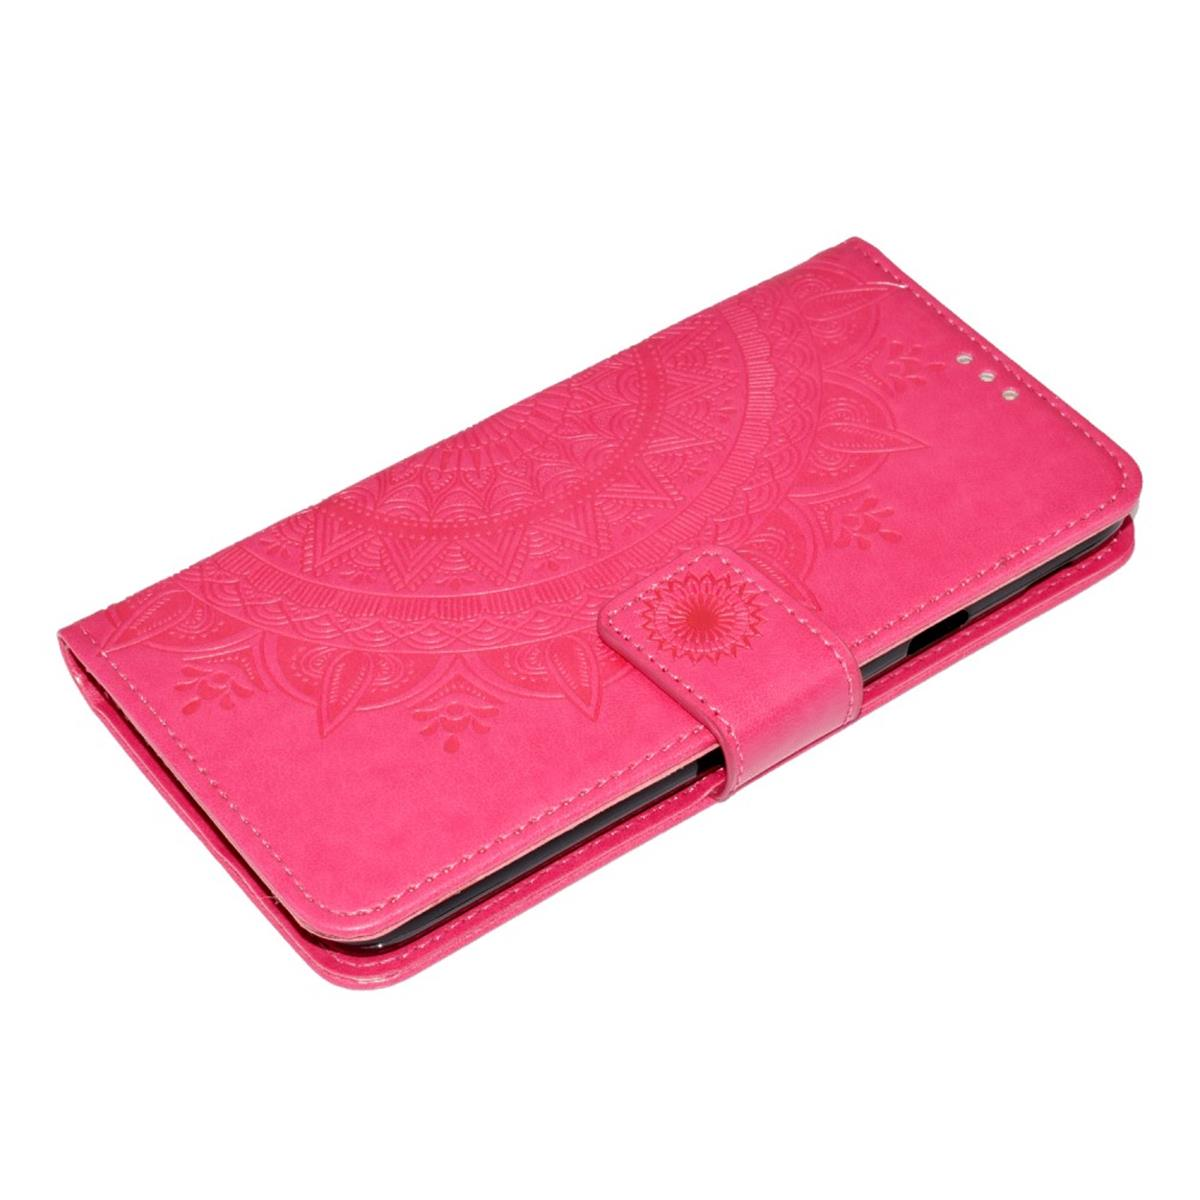 COVERKINGZ Klapphülle mit Mandala Muster, Pink 2018, Galaxy Bookcover, J4 Samsung